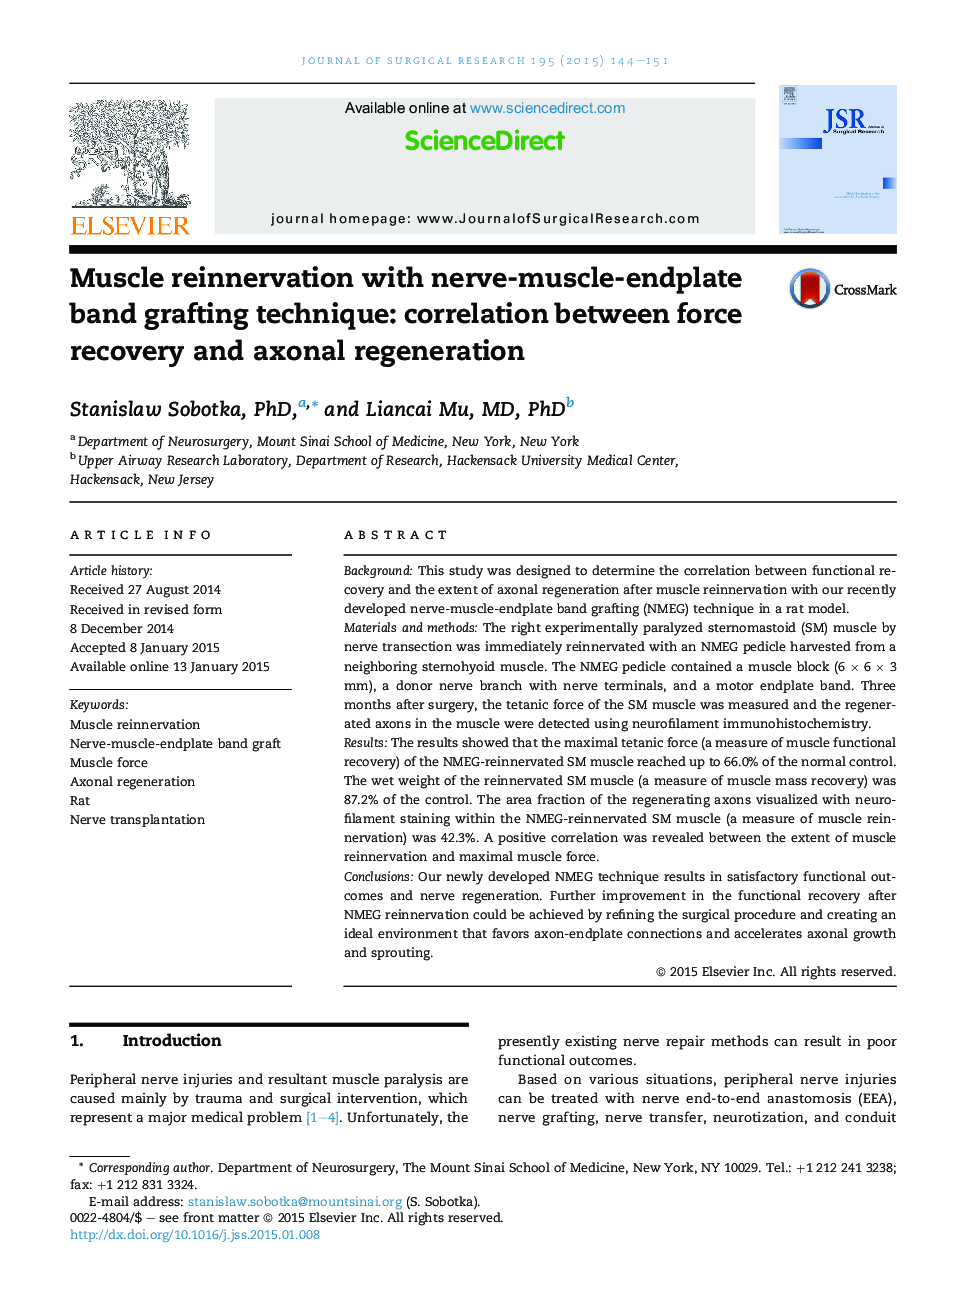 Muscle reinnervation with nerve-muscle-endplate band grafting technique: correlation between force recovery and axonal regeneration